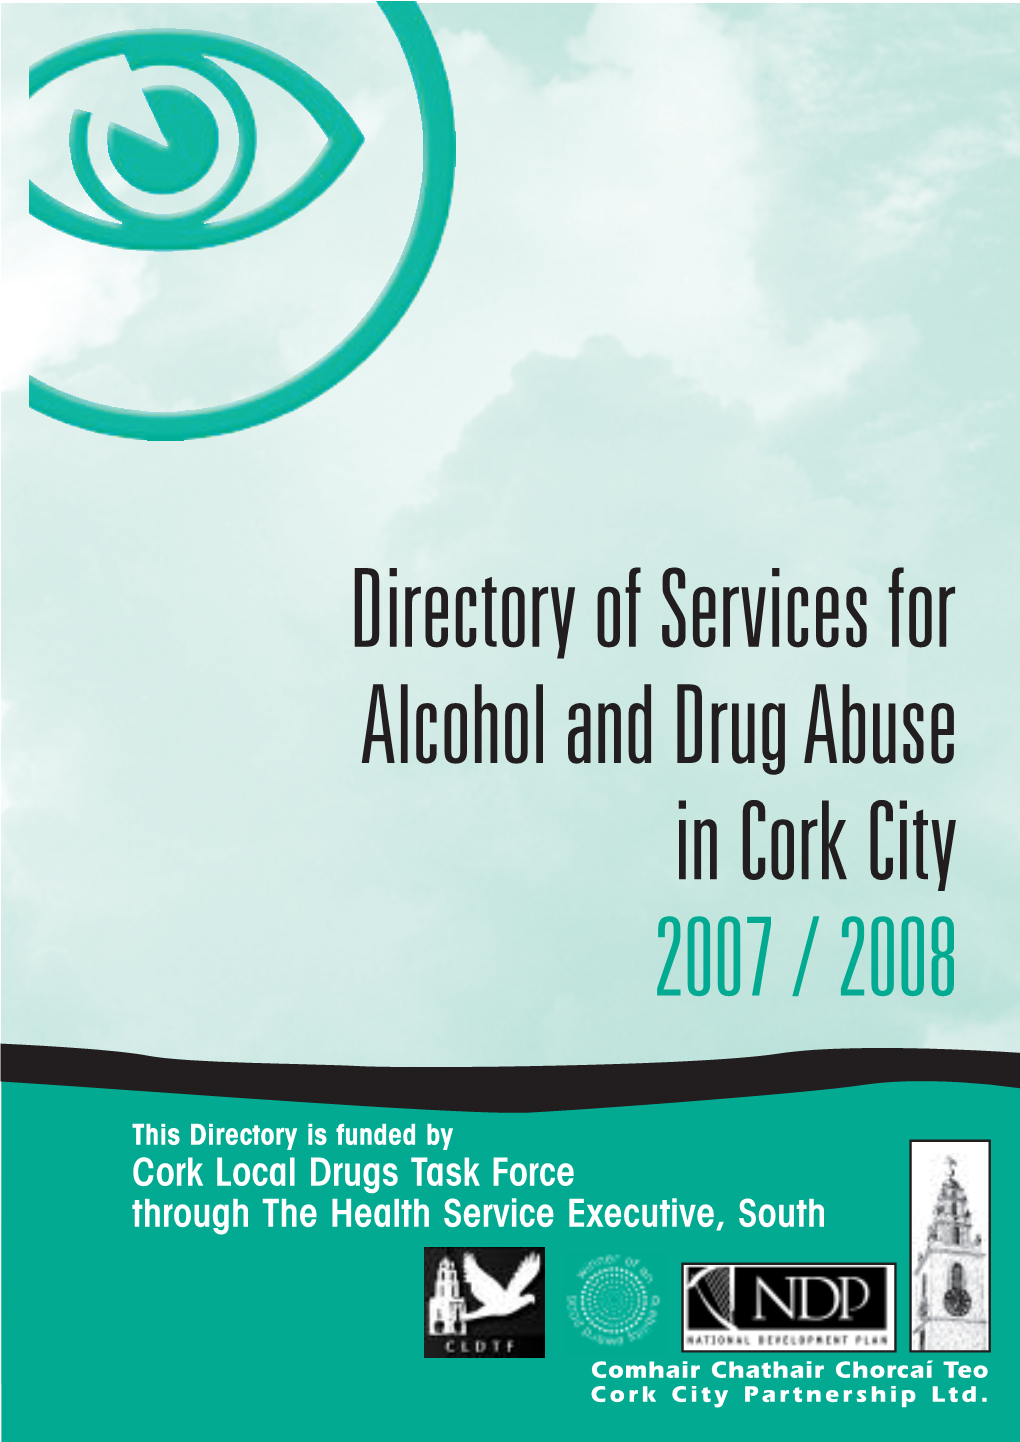 Directory of Services for Alcohol and Drug Abuse in Cork City: 2007 / 2008